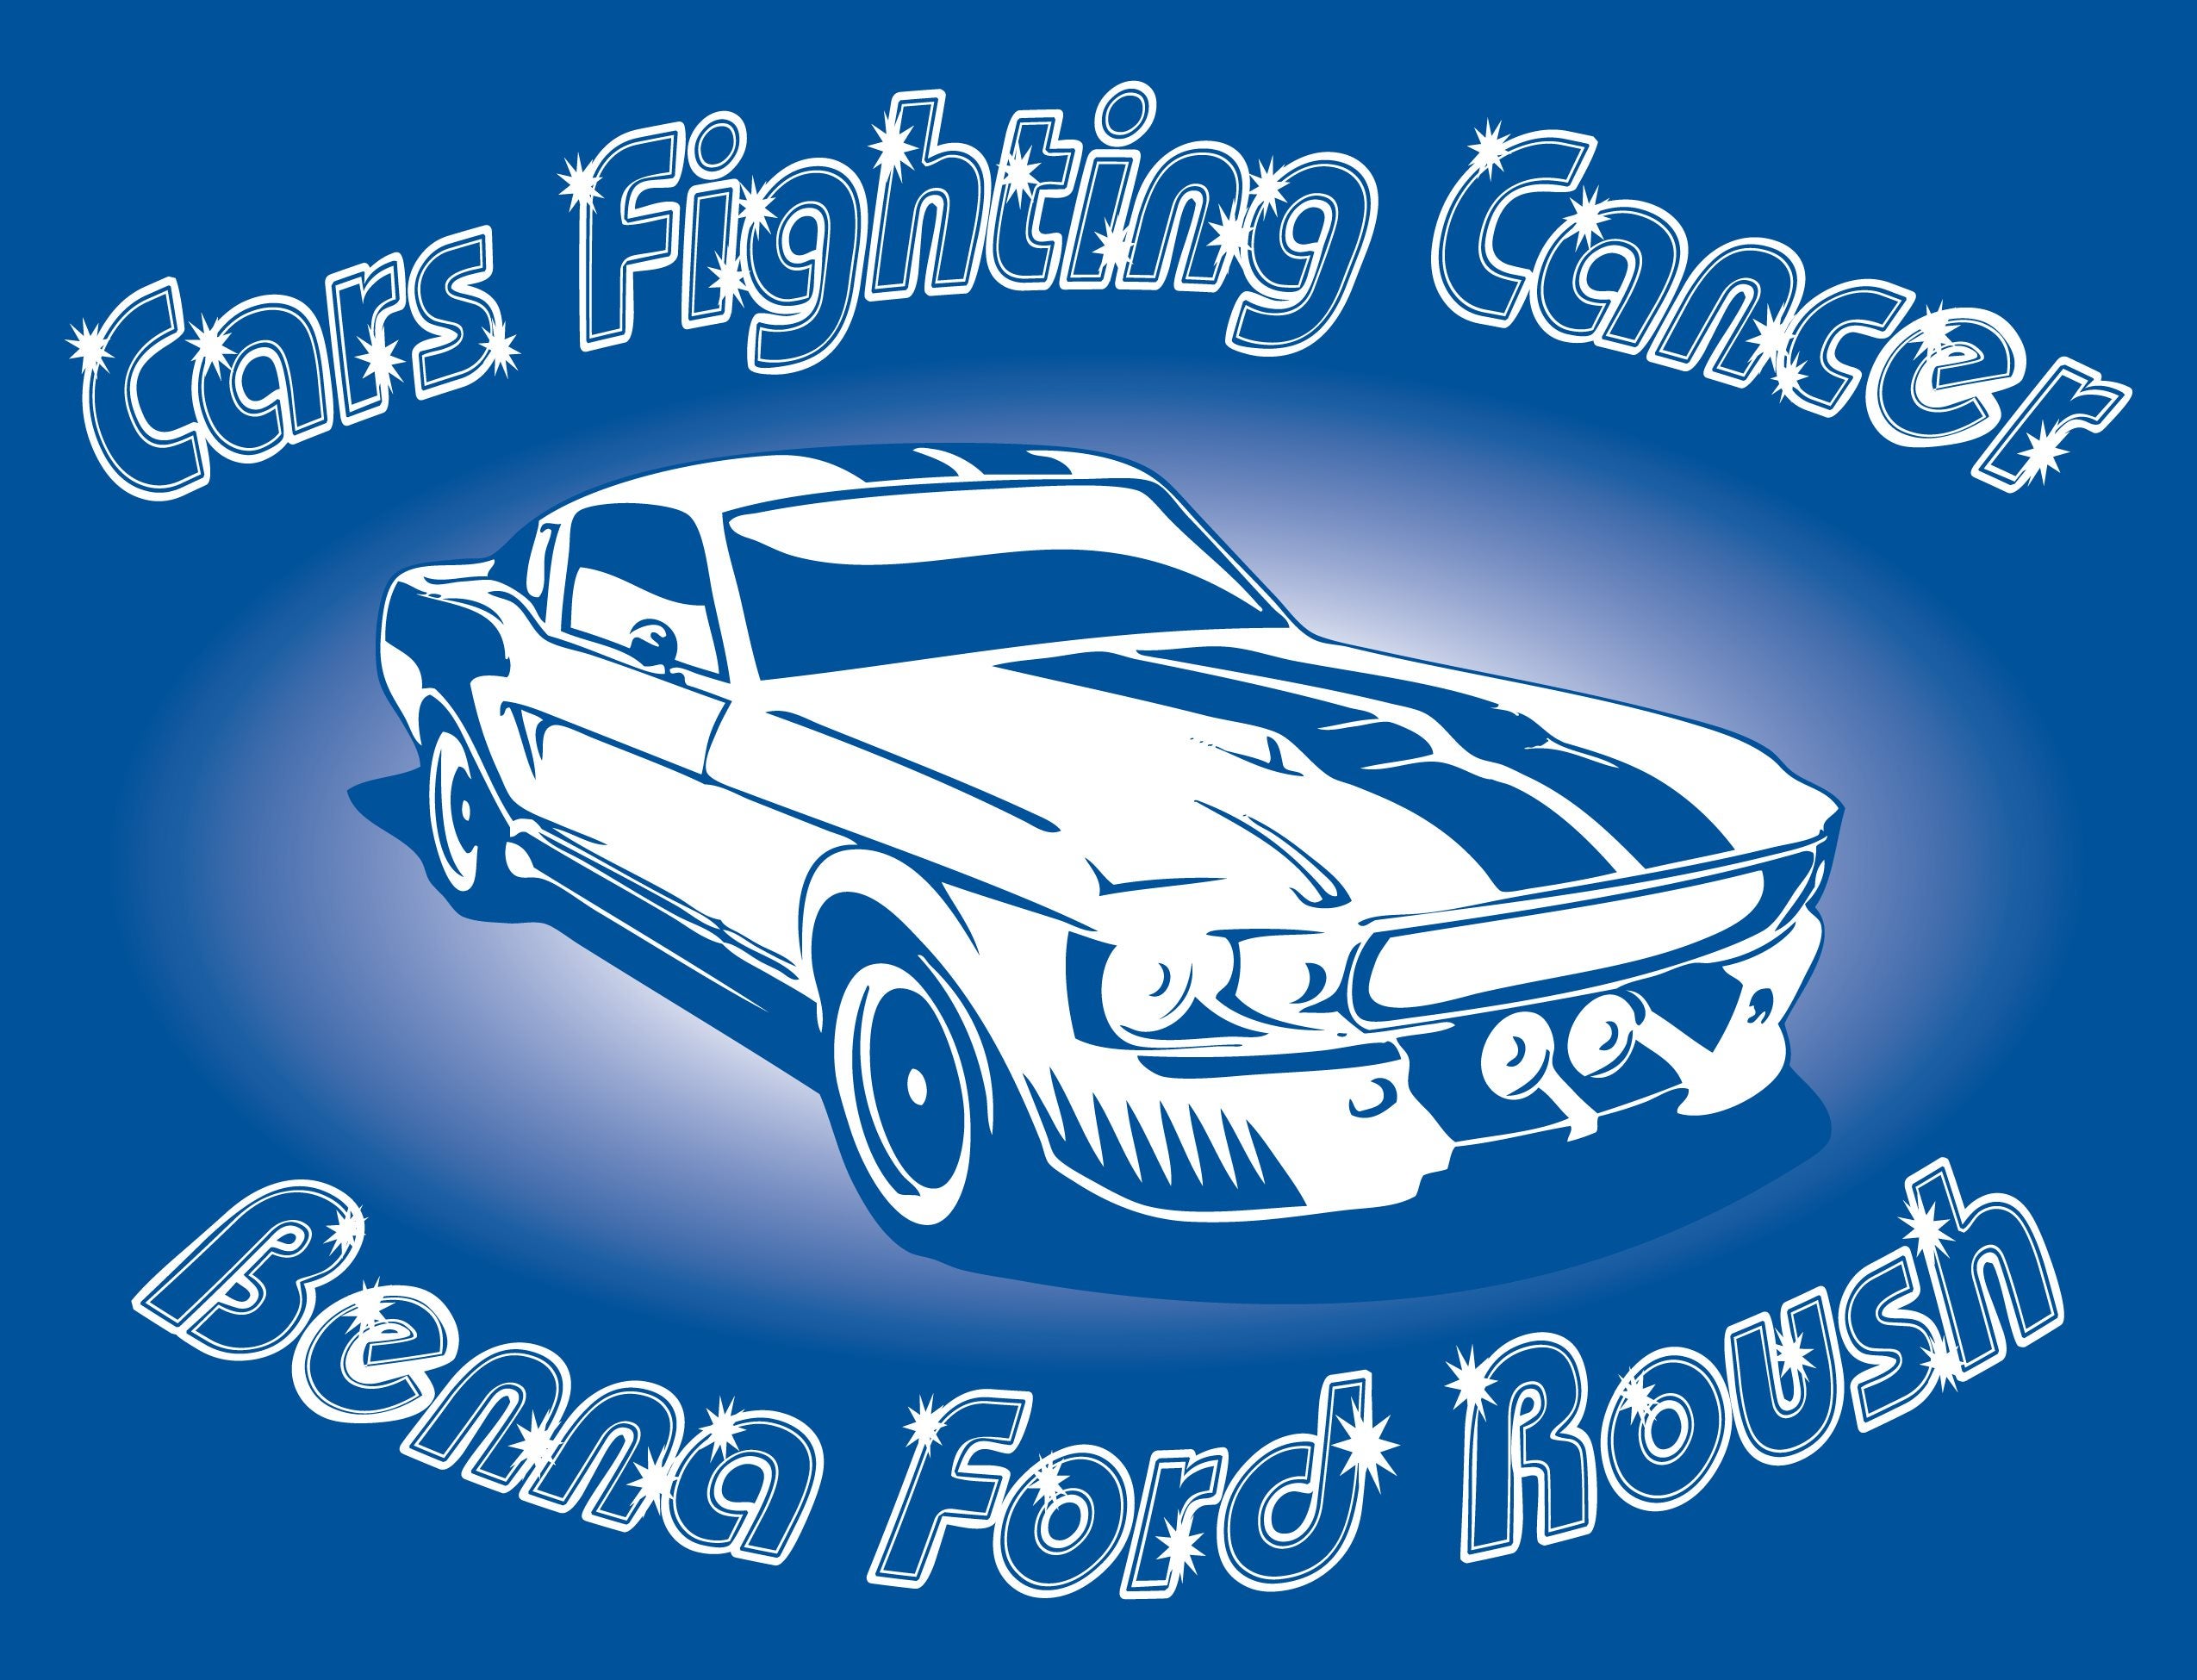 Cars Fighting Cancer Benna Ford